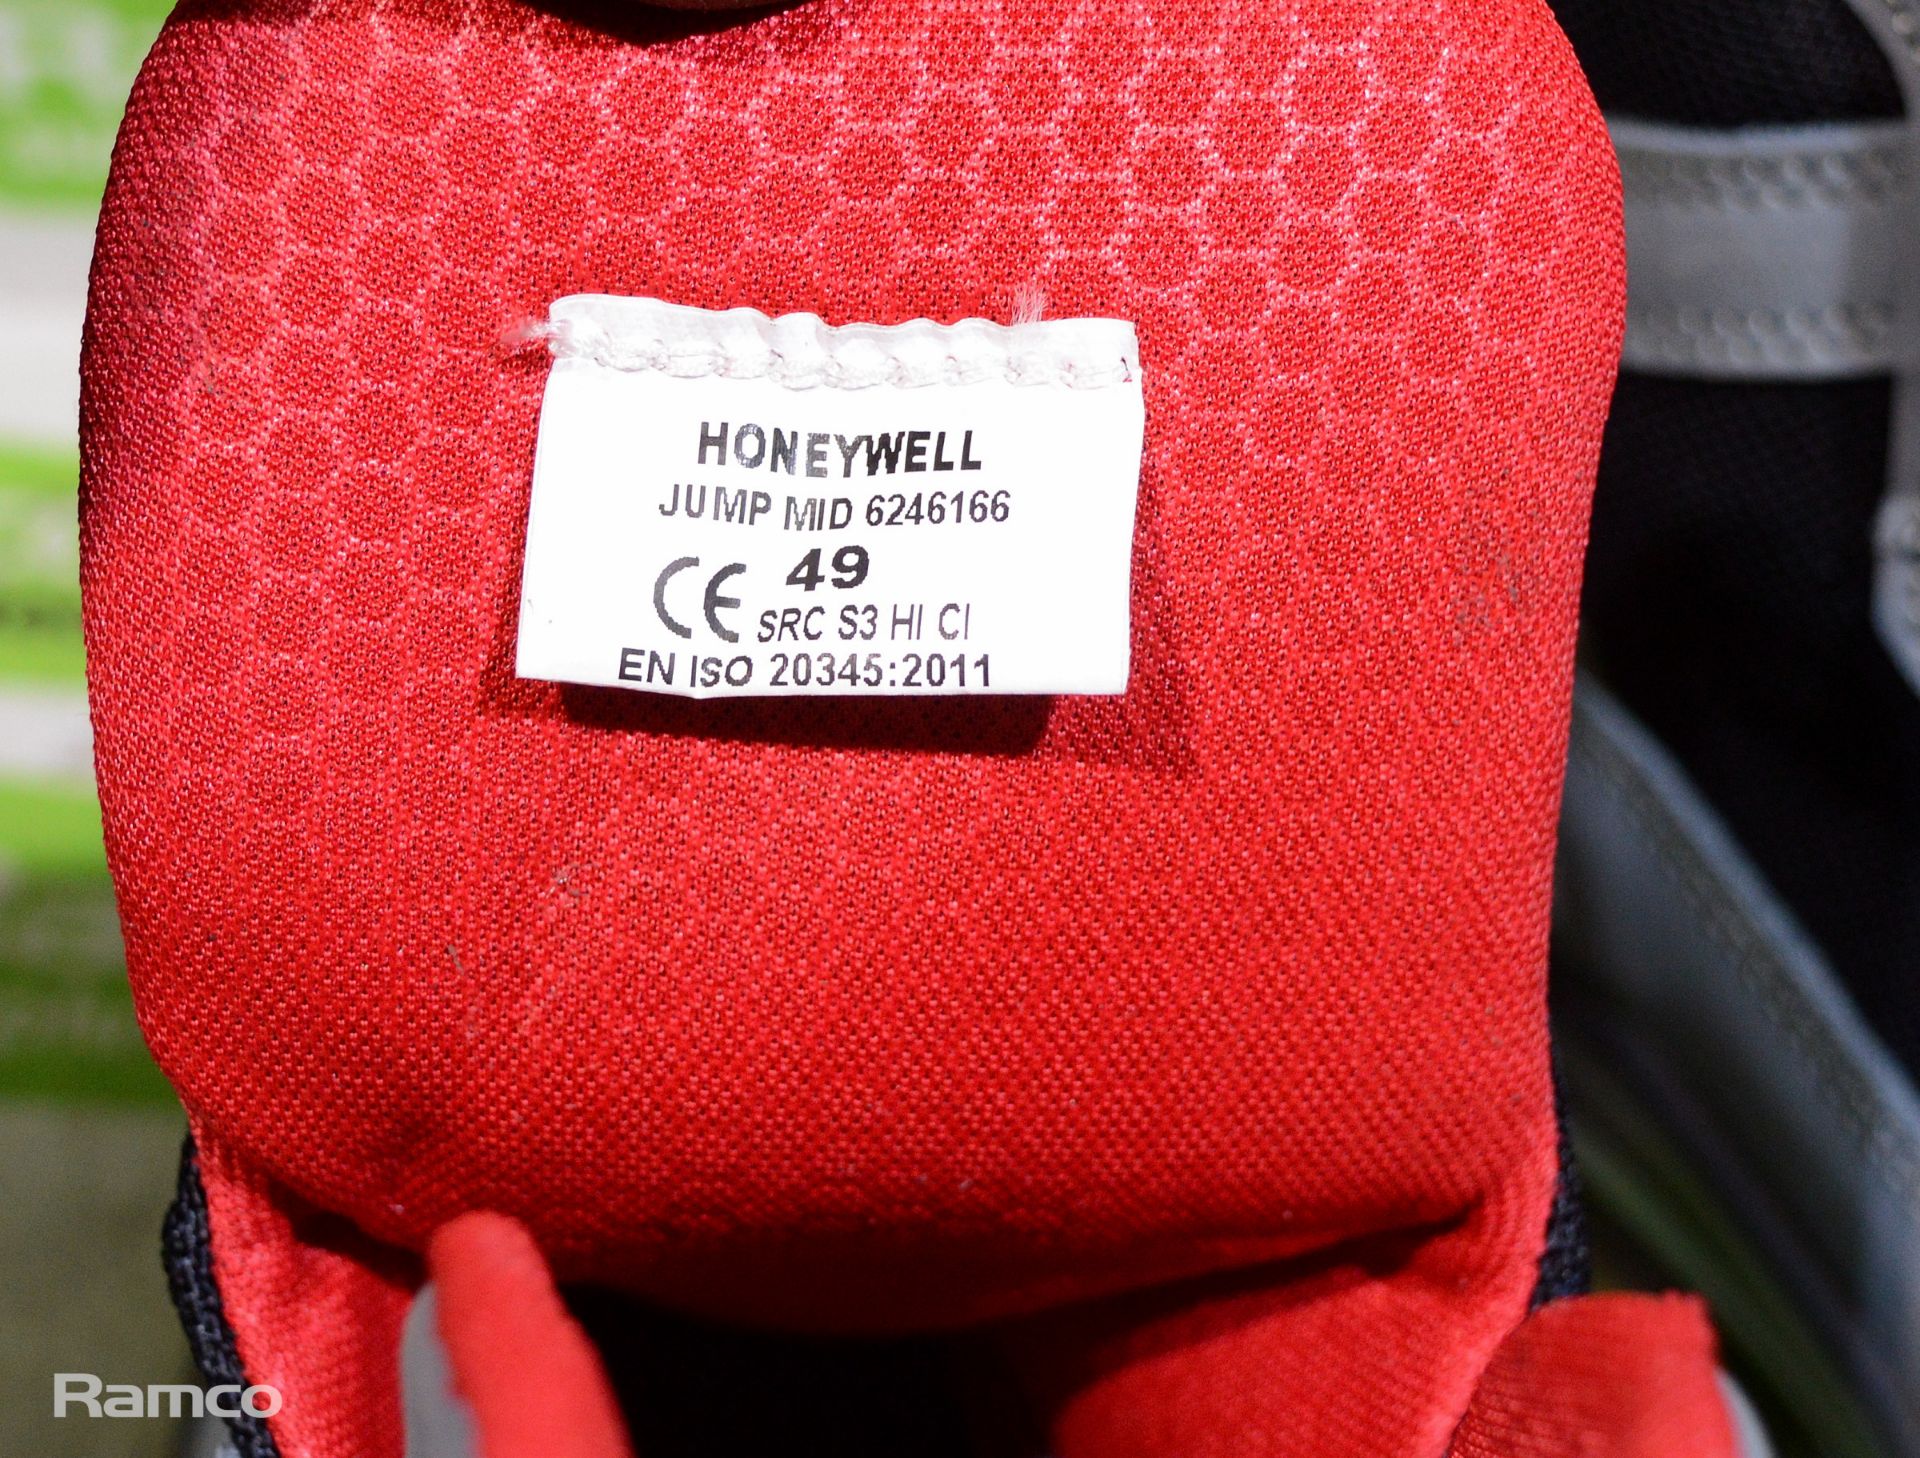 Honeywell Jump Mid workwear boots - size EUR 49 - Image 2 of 3